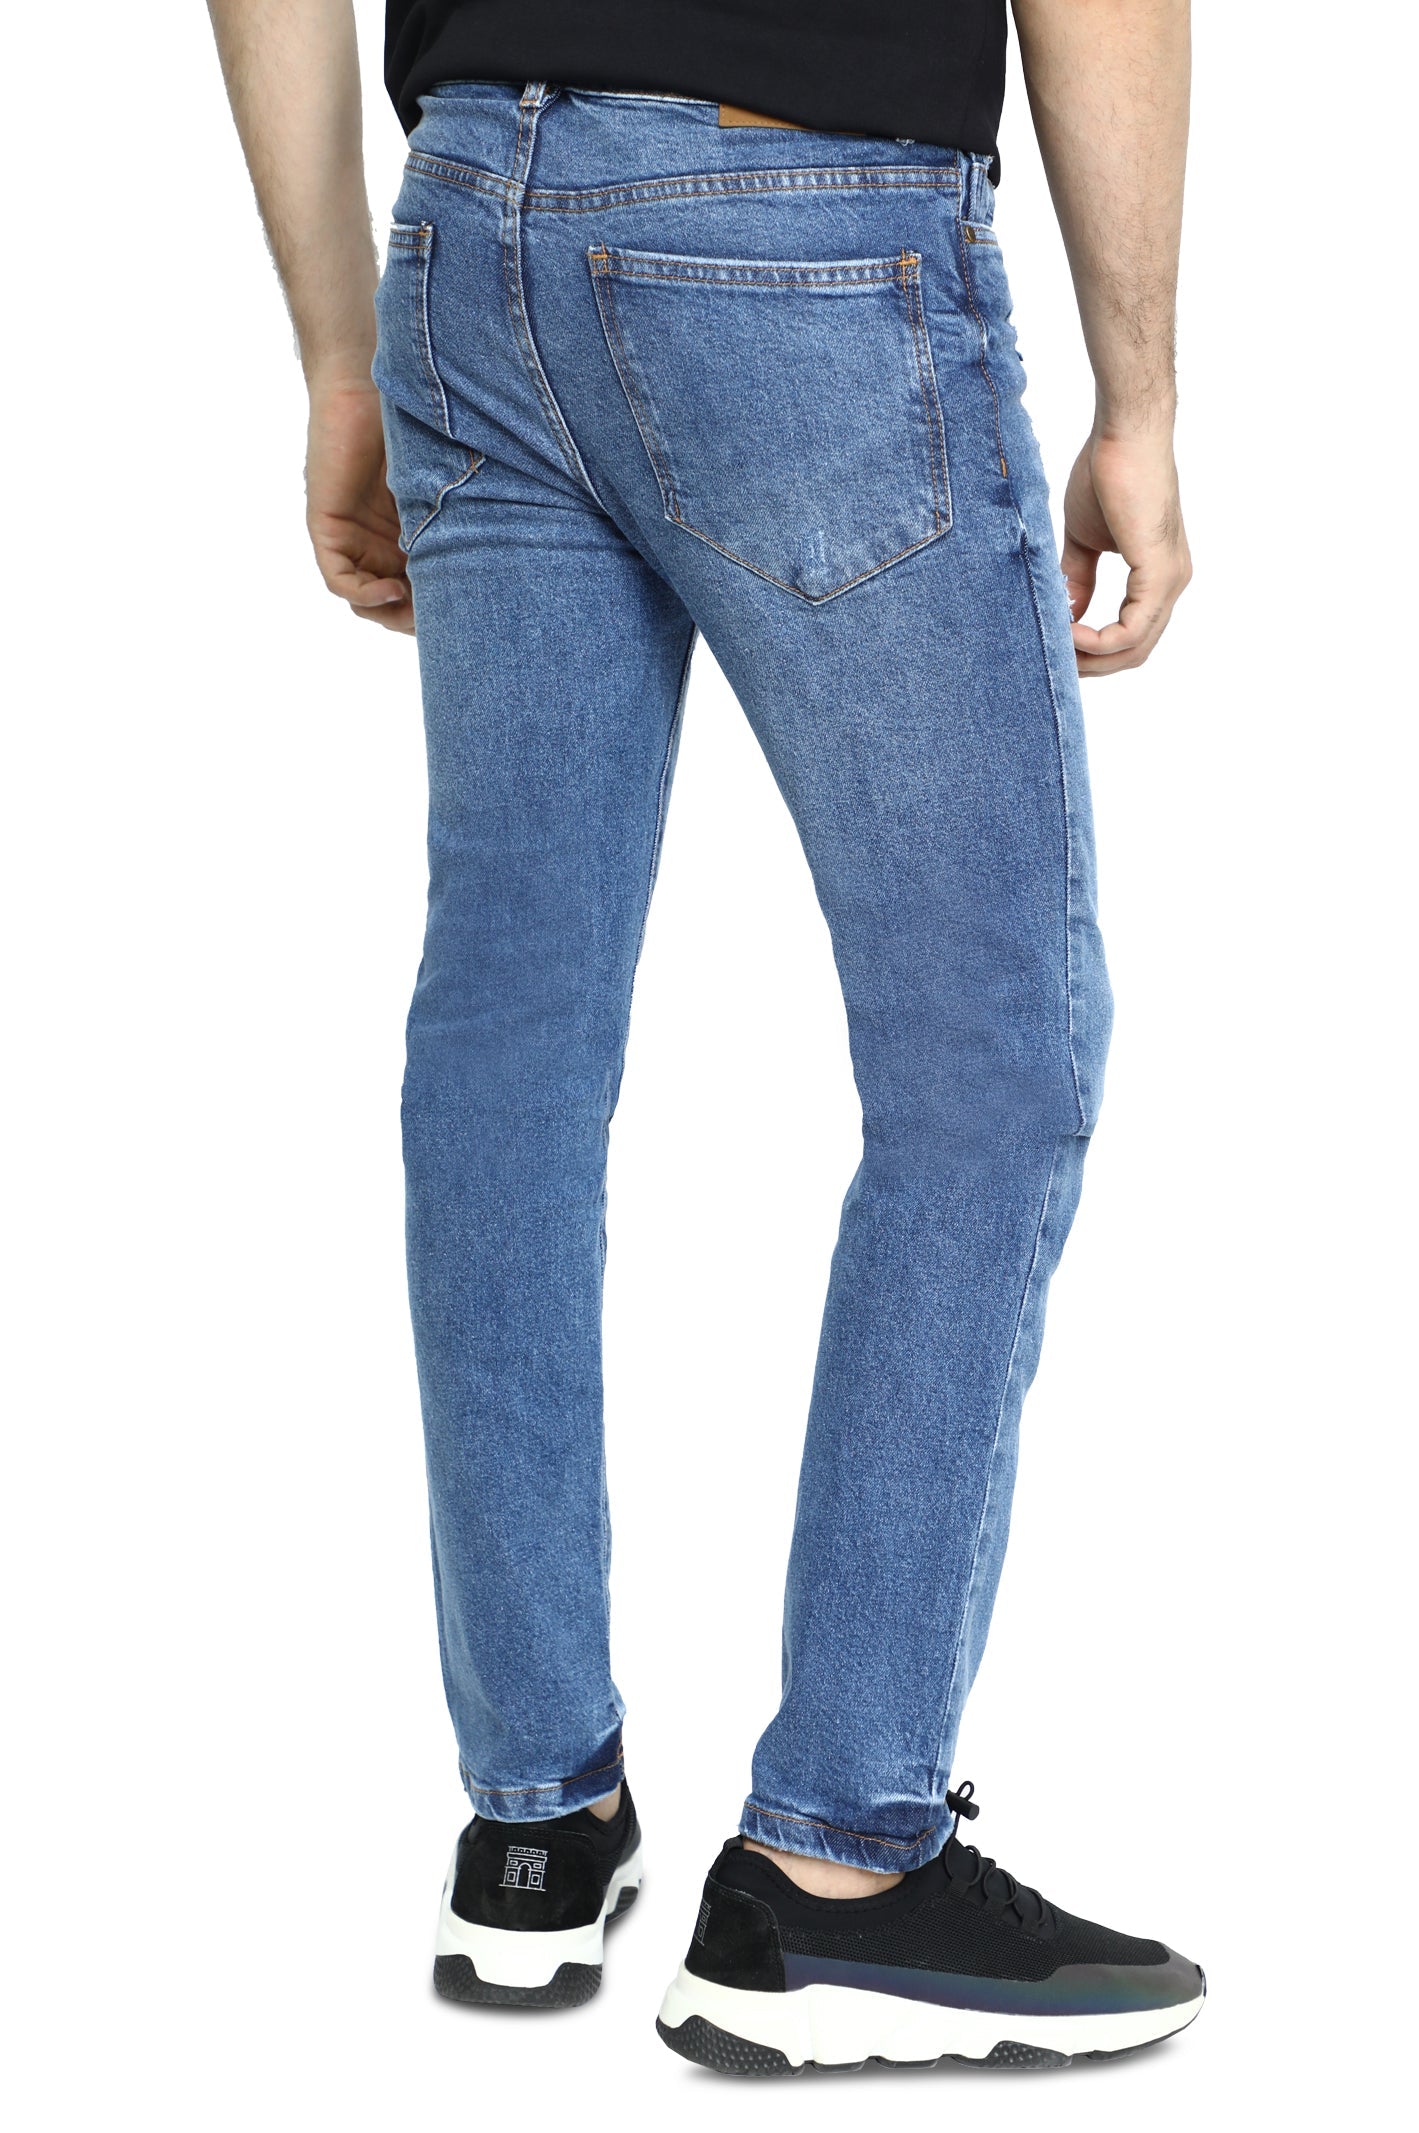 Casual Jeans SKU: BJ2920-M-BLUE - Diners